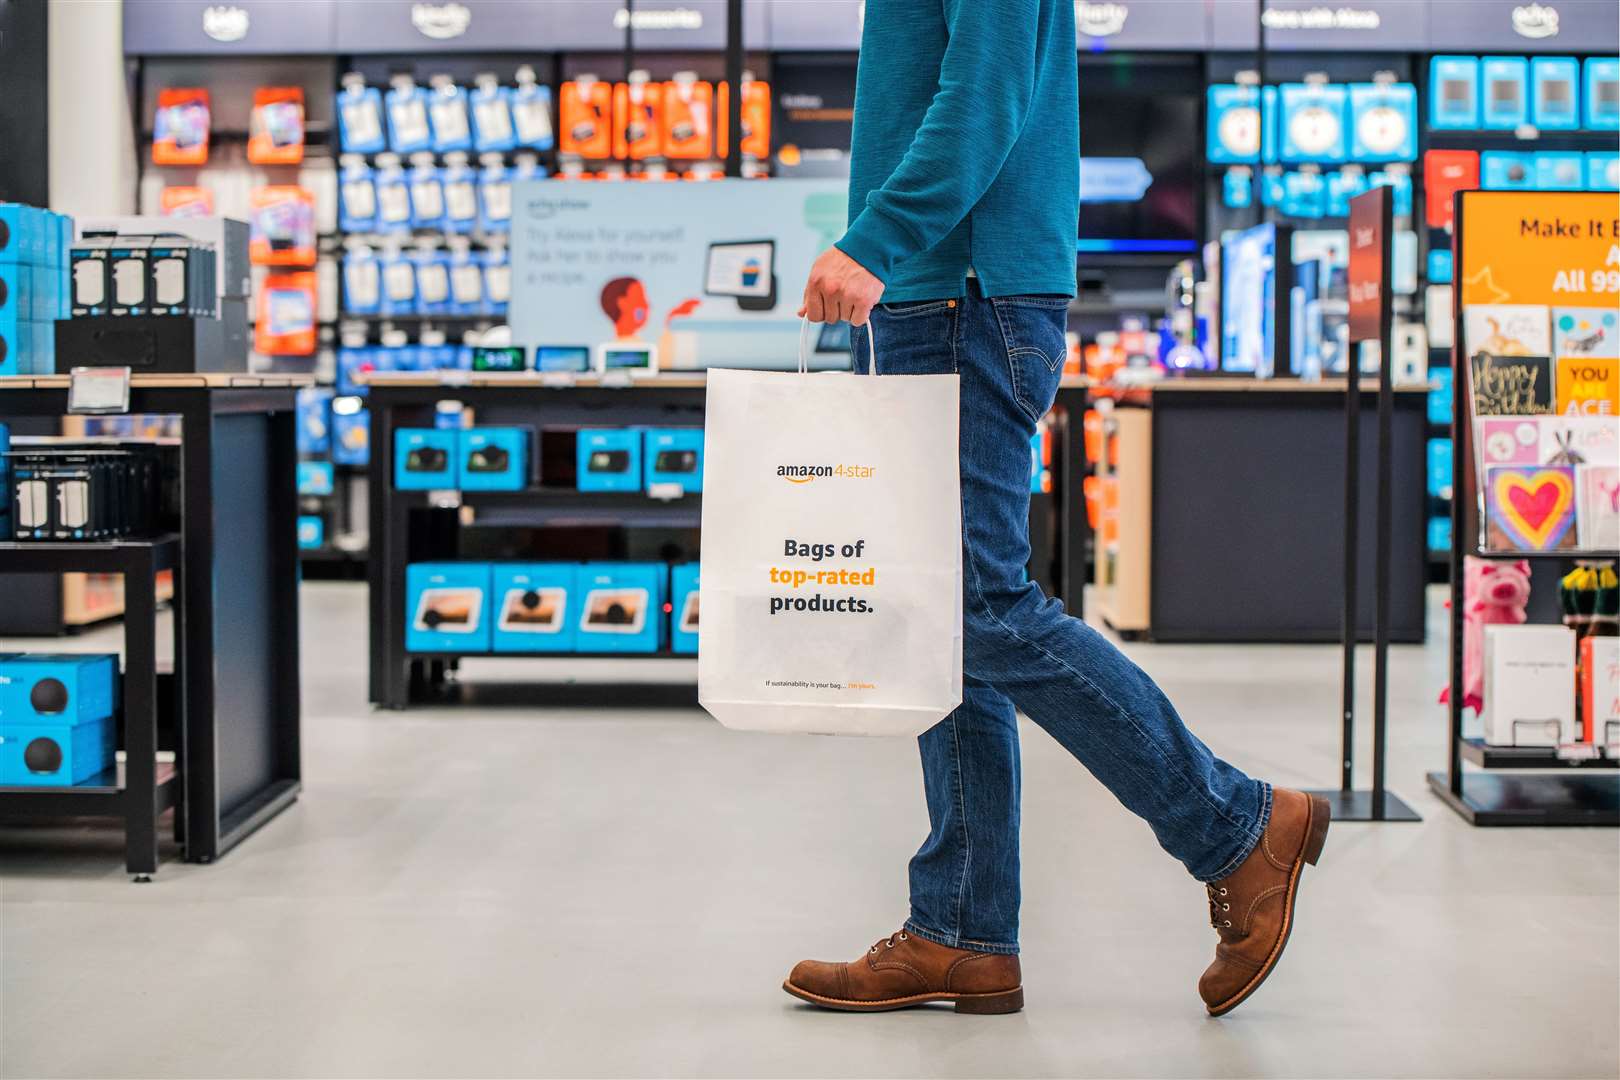 Amazon says it wants to concentrate on its Amazon Fresh concept following the closure of its 4-Star store at Bluewater. Picture: Amazon